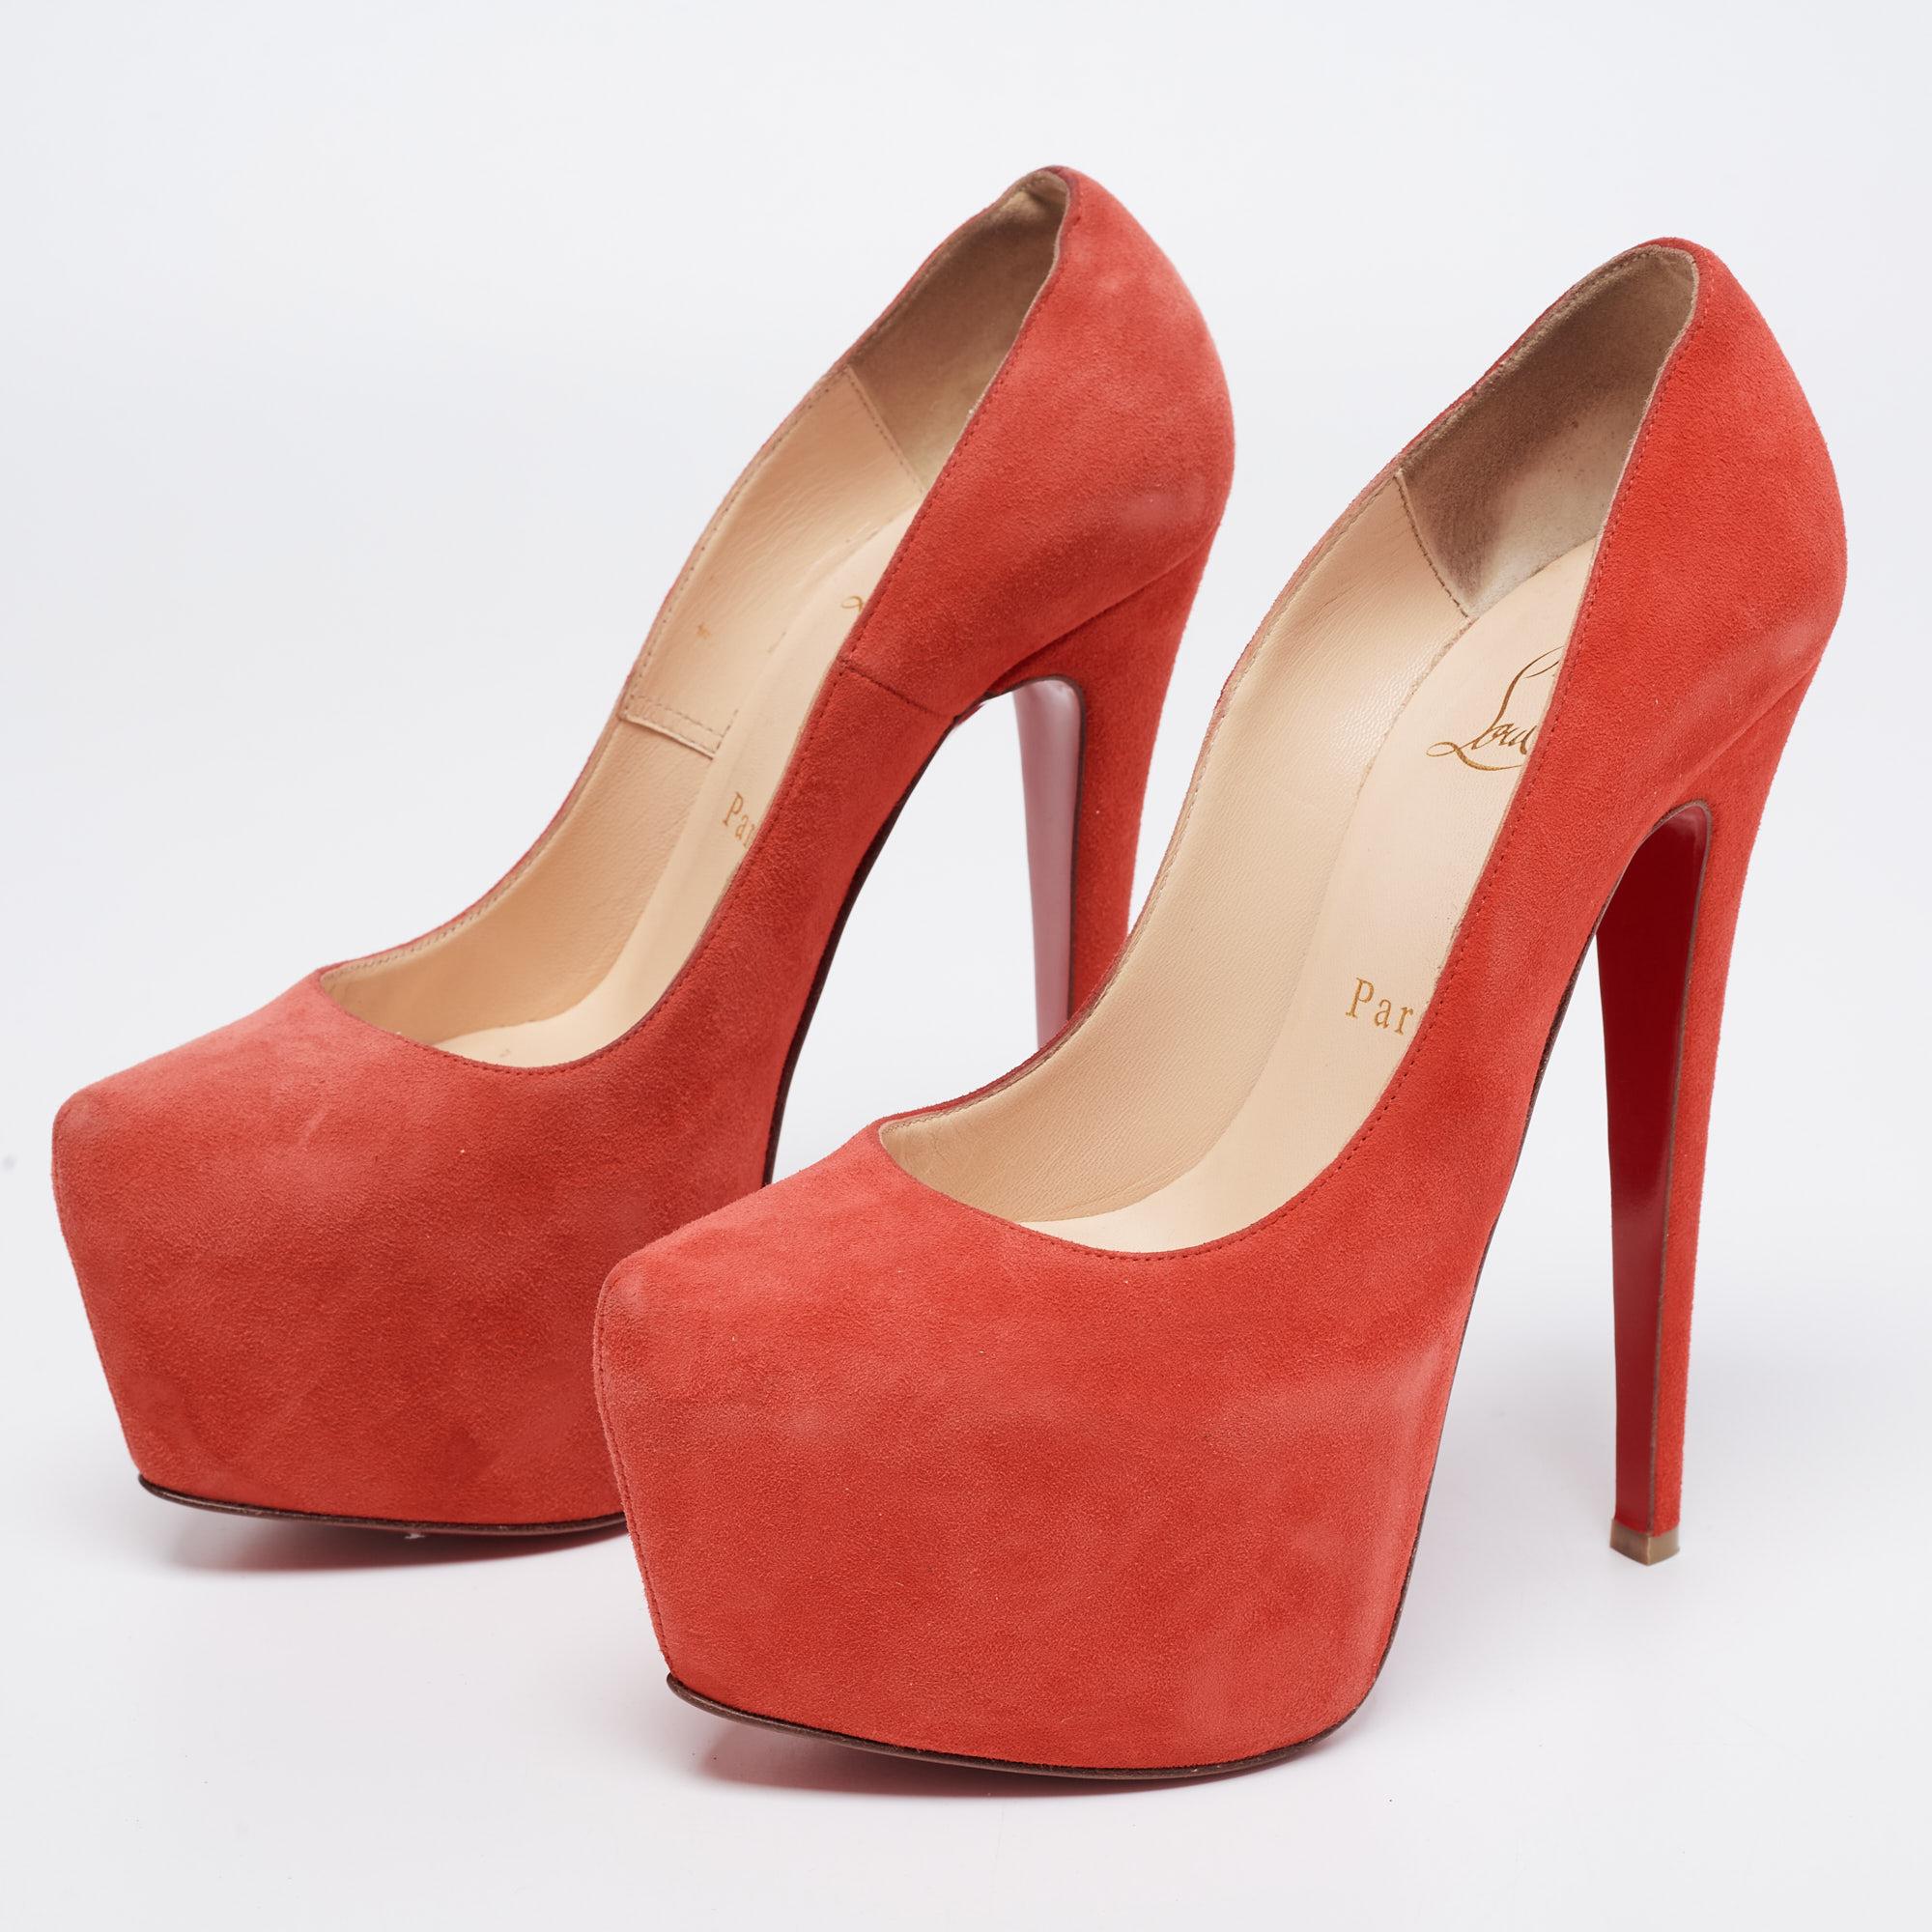 These gorgeous platform pumps from Christian Louboutin epitomize the concept of high fashion. They are crafted from coral red suede and designed with chunky platforms. The pumps are equipped with comfortable leather-lined insoles and are elevated on